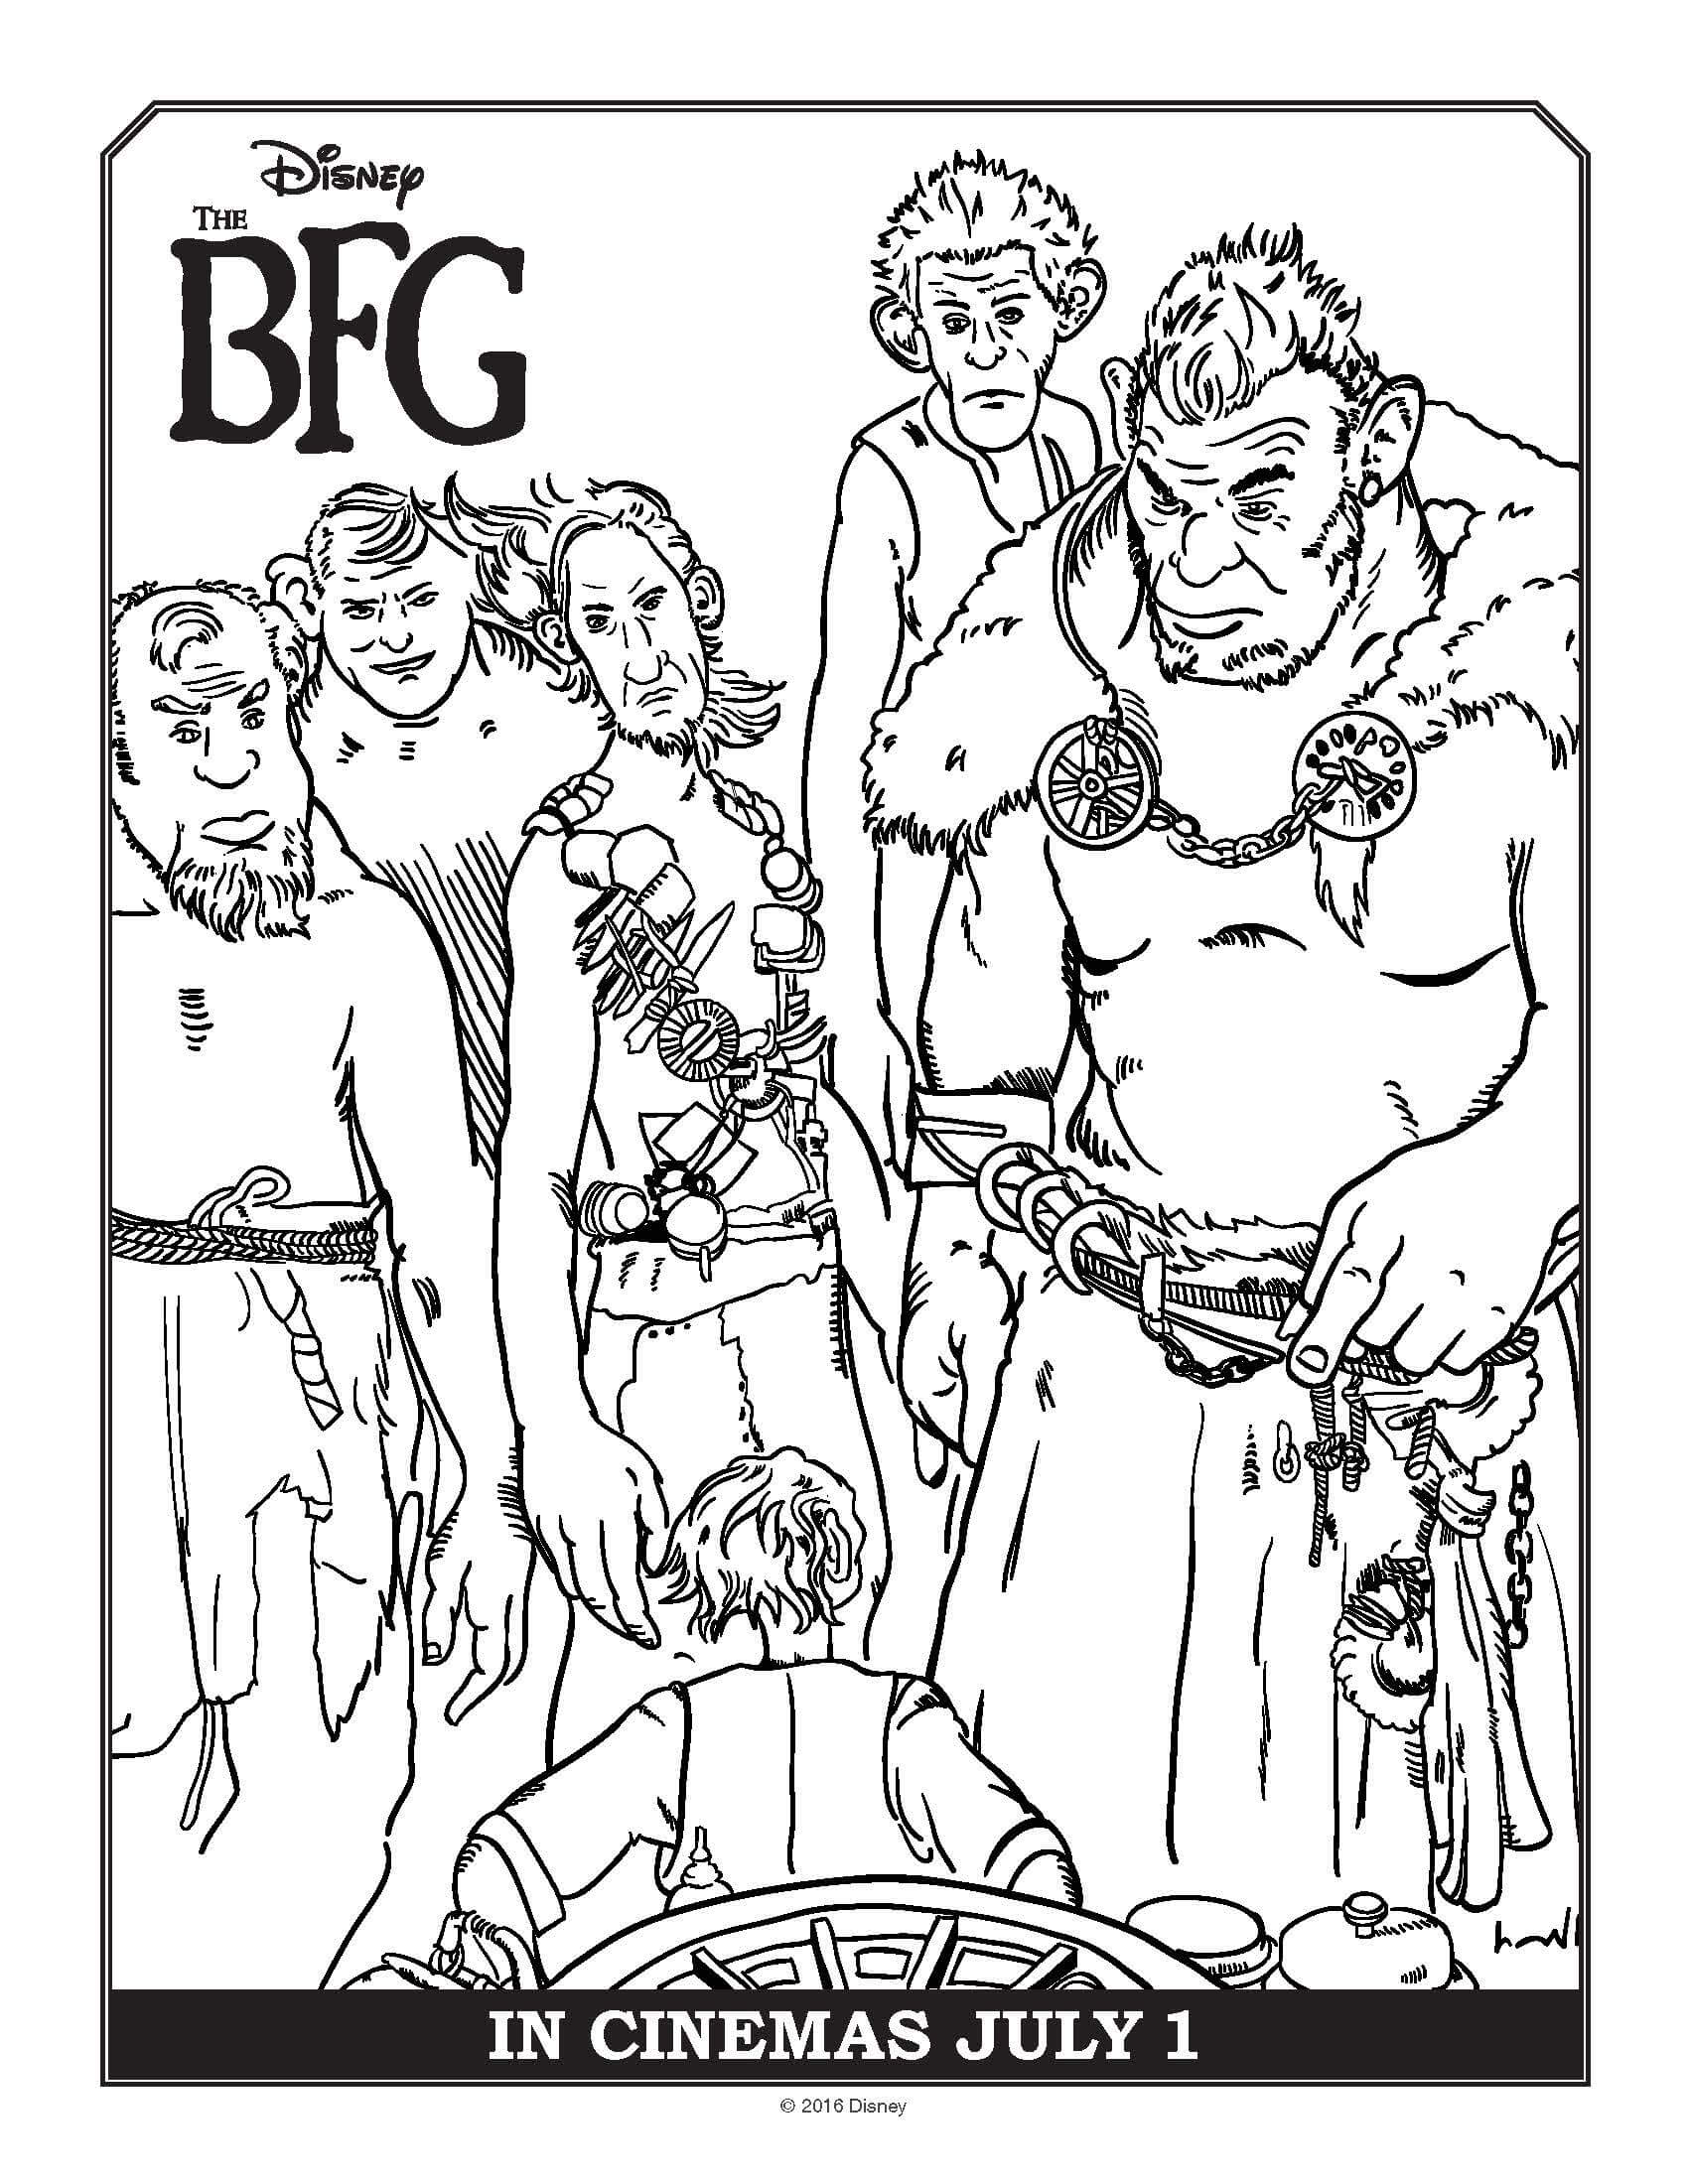 The BFG Coloring pages and free printables